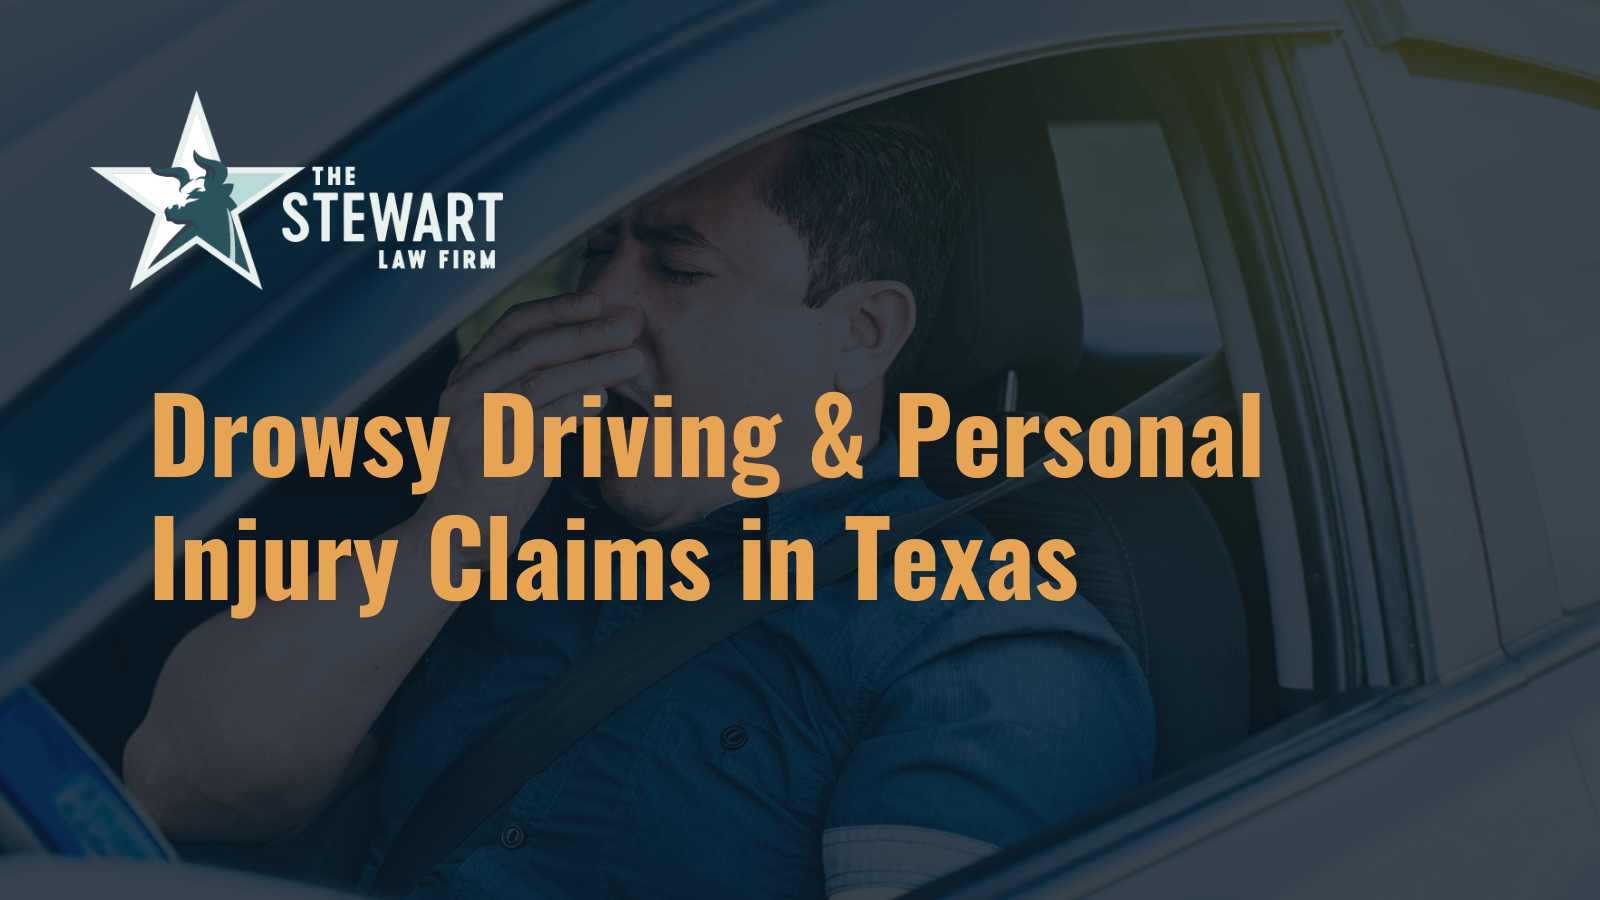 Drowsy Driving & Personal Injury Claims in Texas - the stewart law firm - austin texas personal injury lawyer